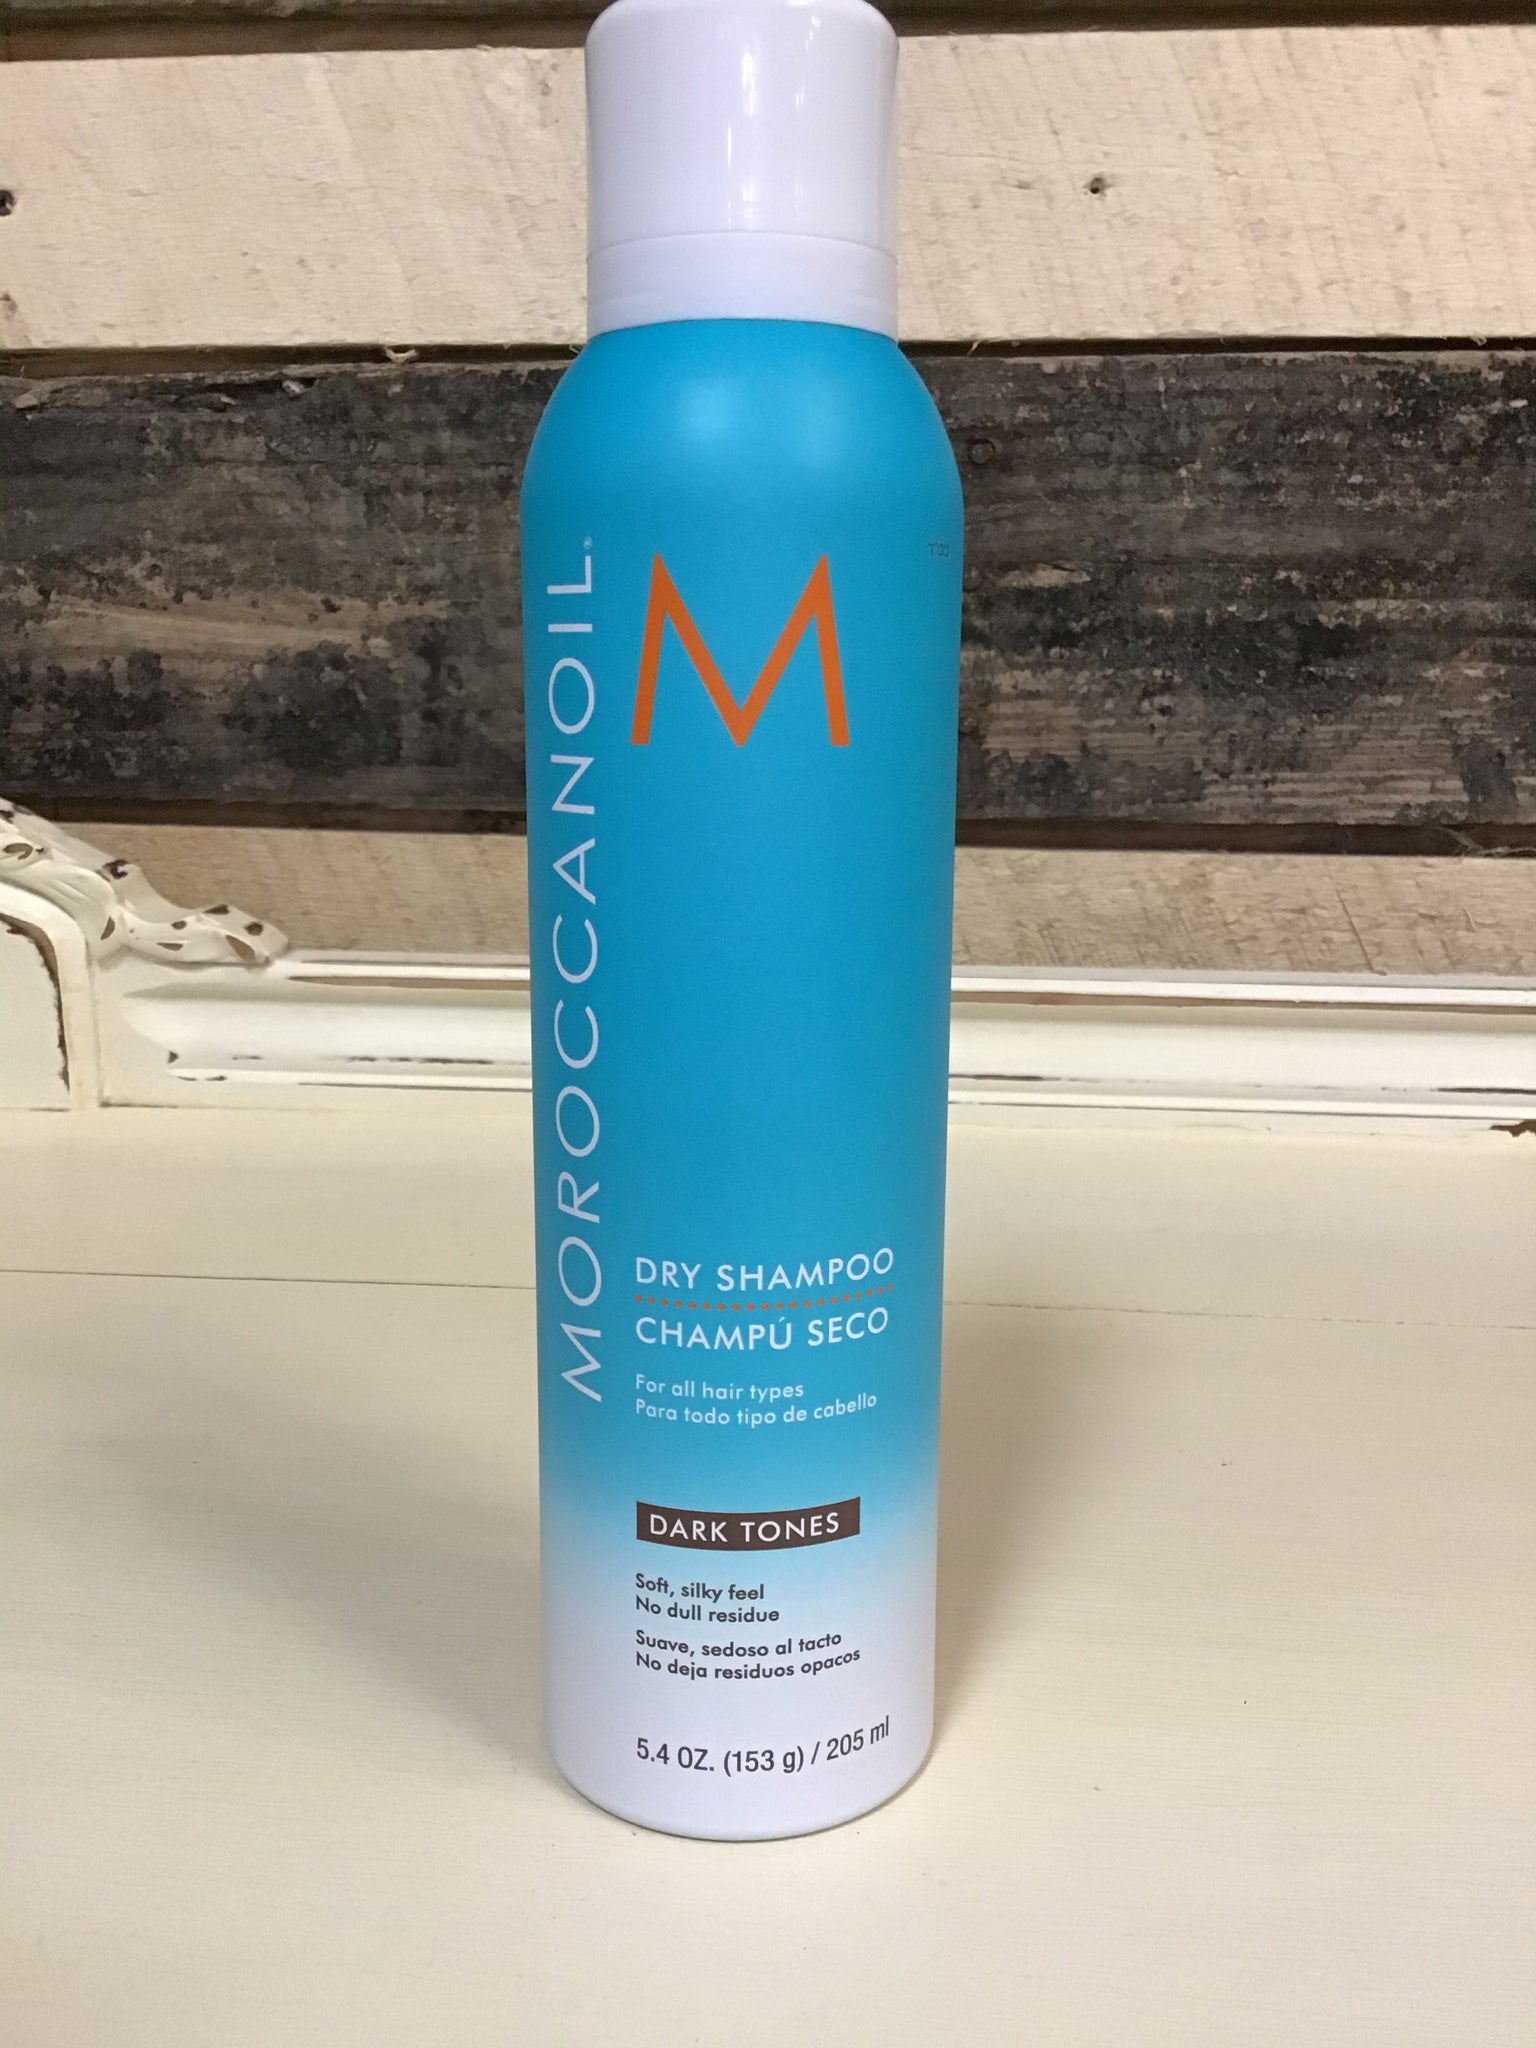 Sindssyge klodset Countryside Moroccan oil dry shampoo DARK TONES – The Parlor On Market